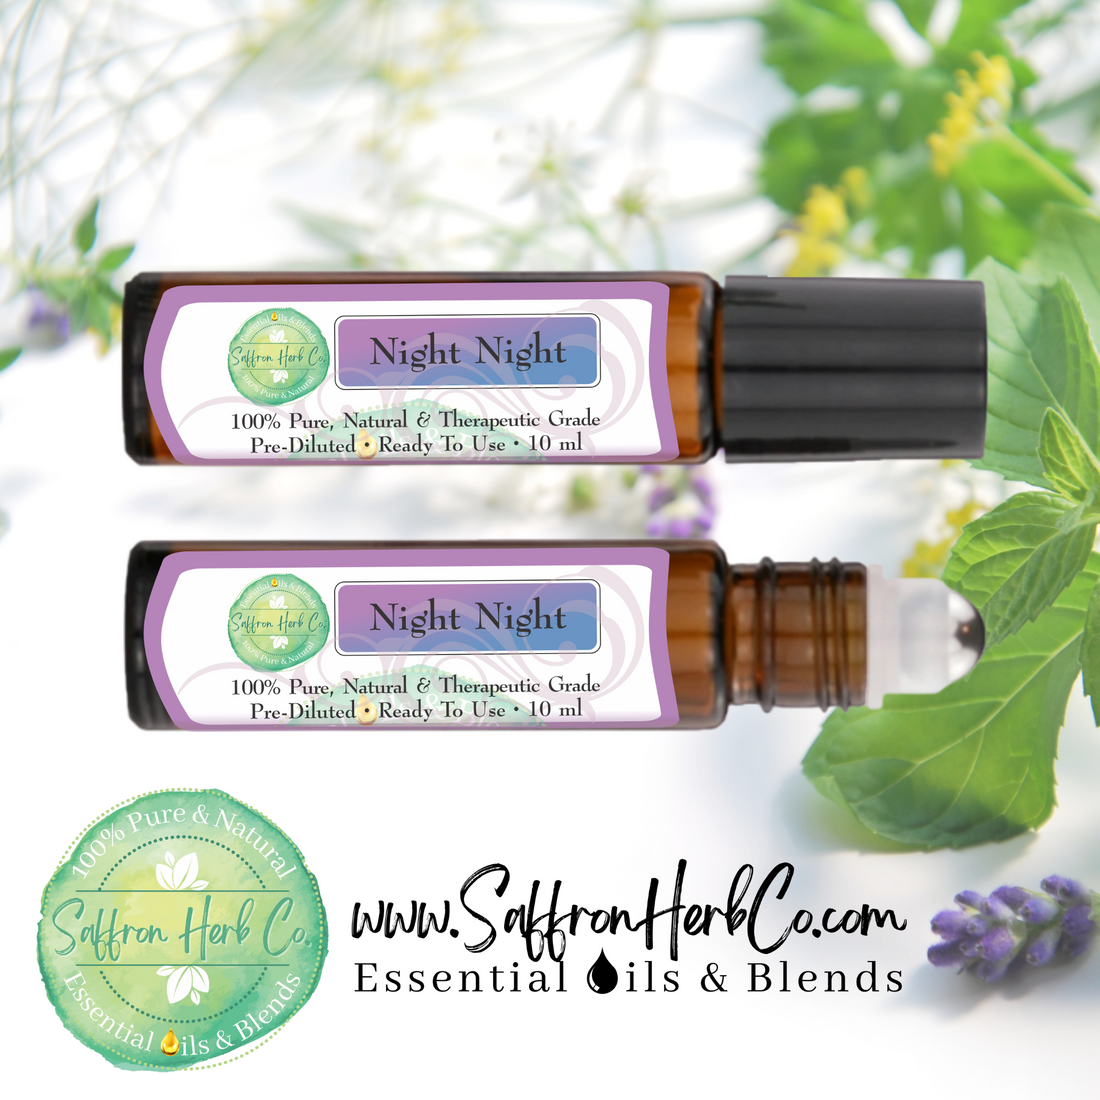 Why should you use a Night Night Essential Oil Roller Bottle?